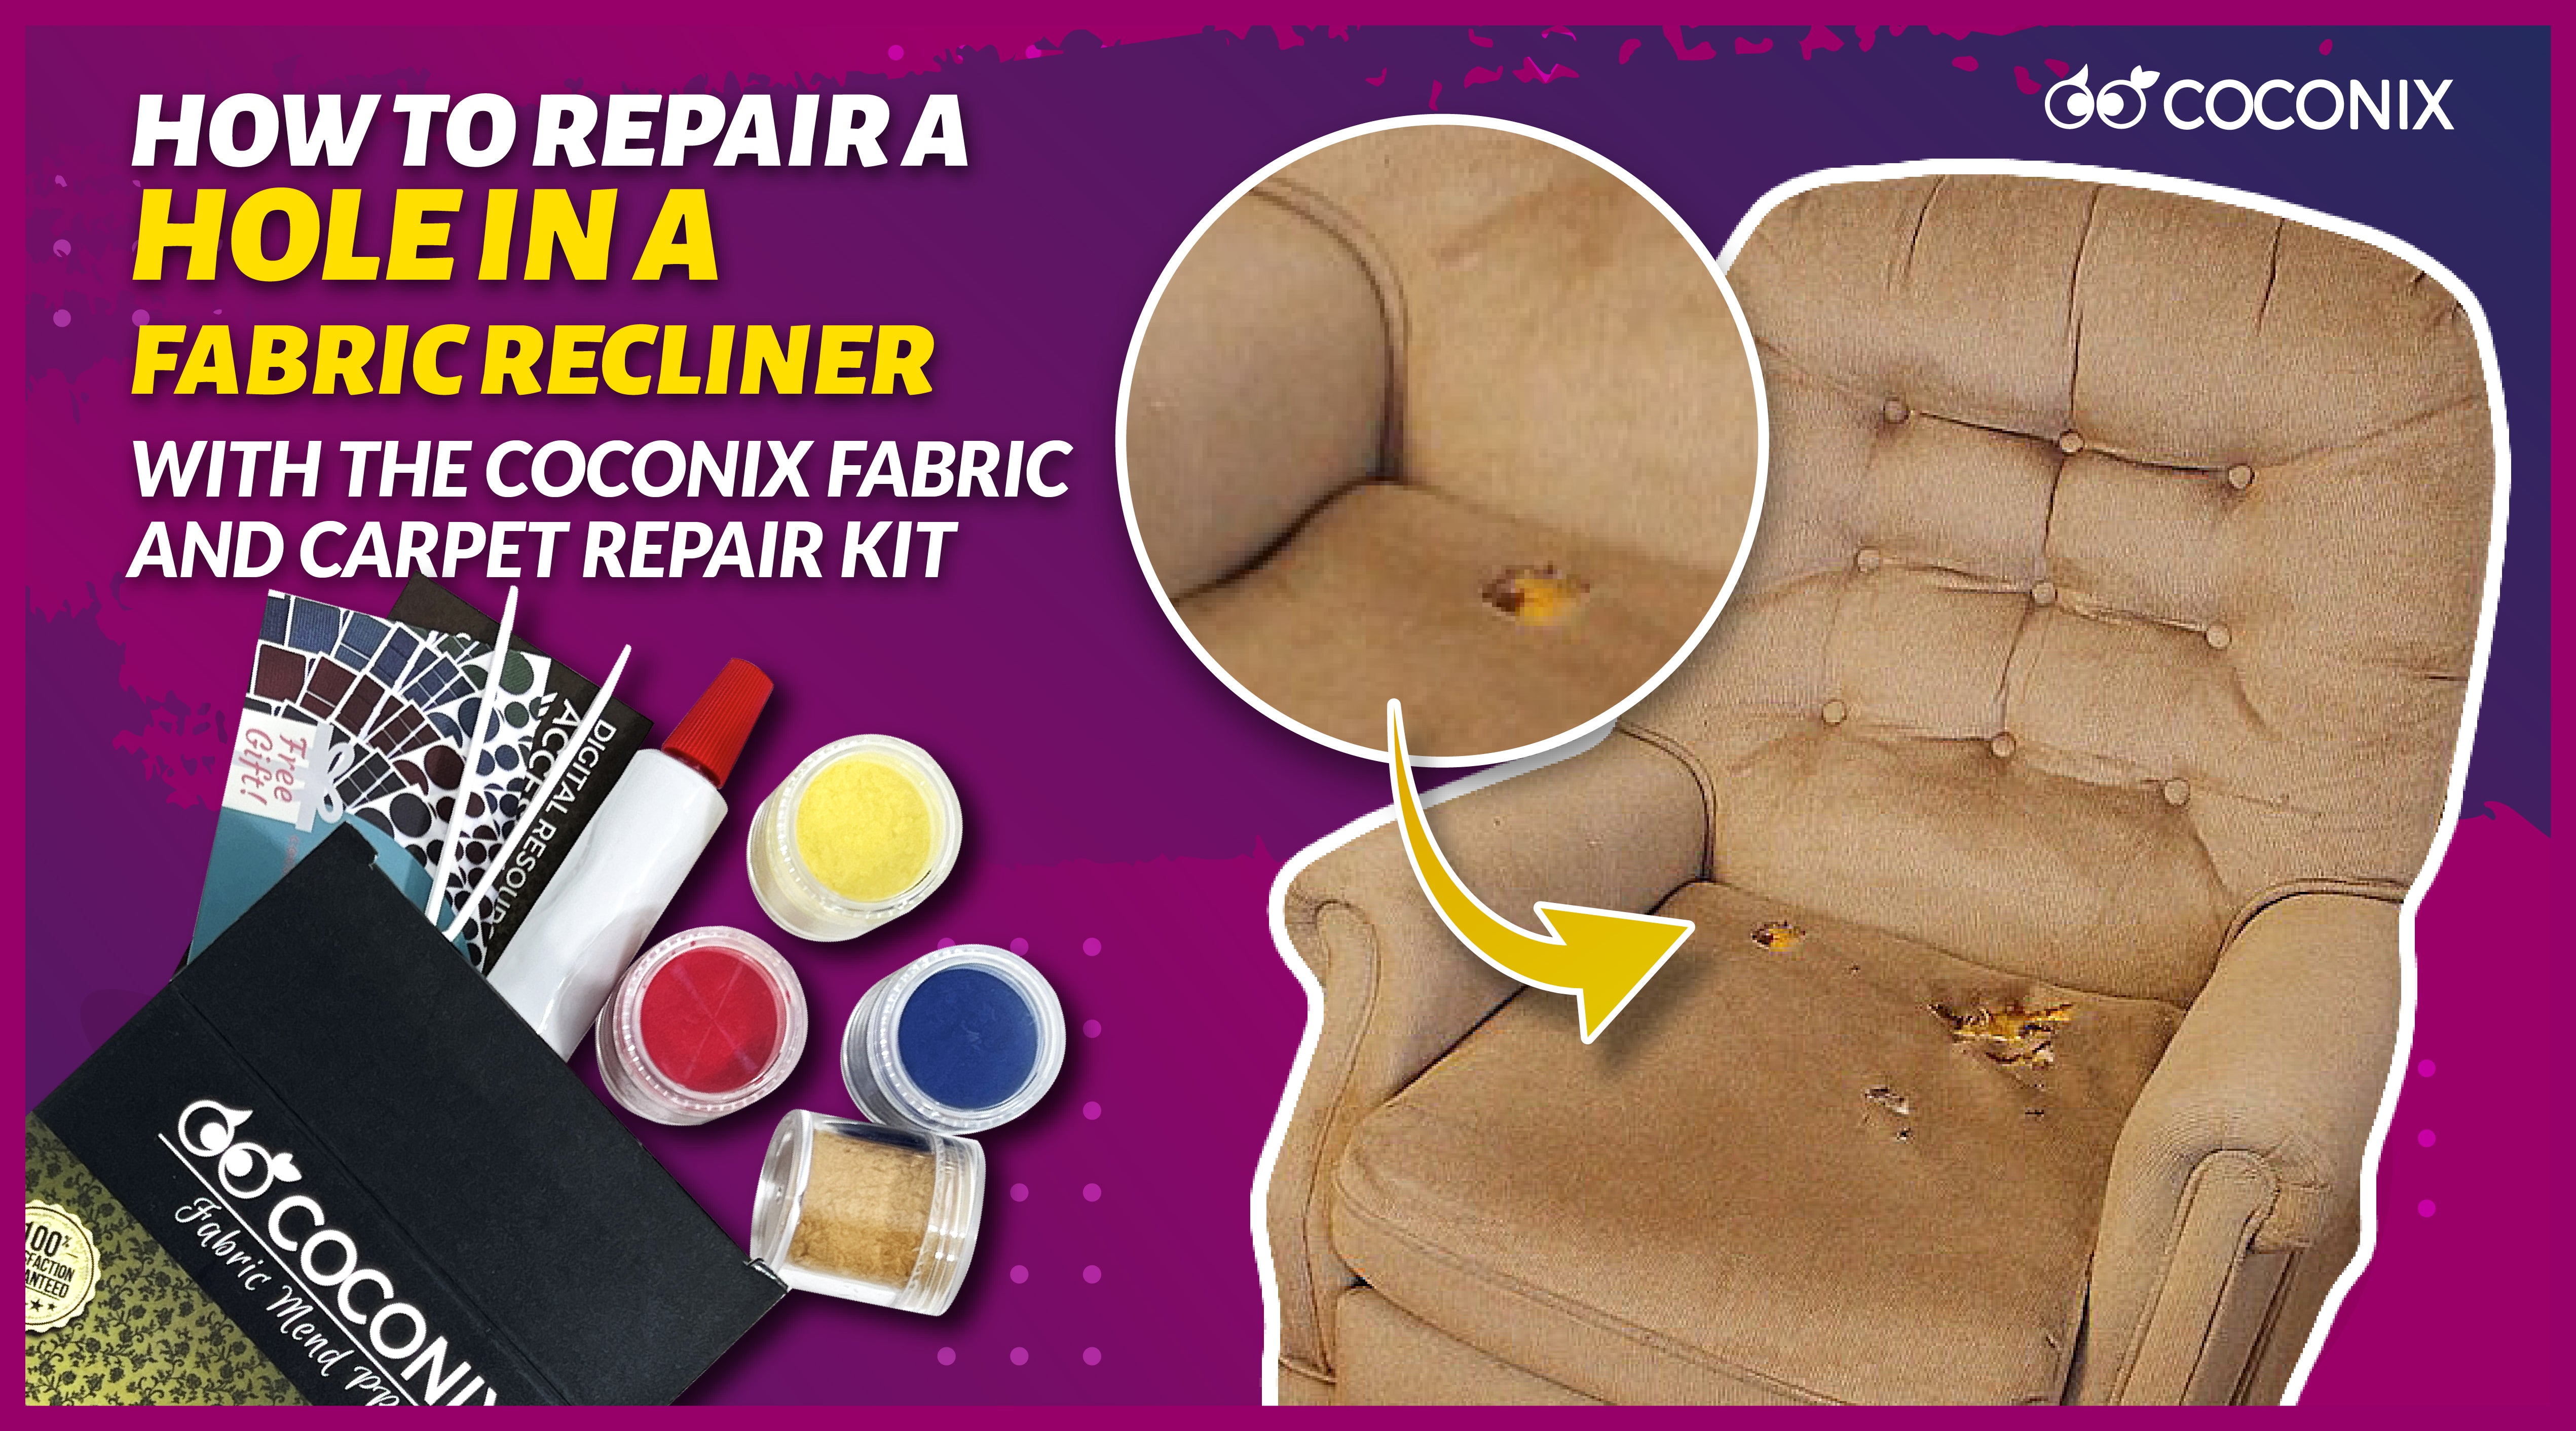 How to repair a leather couch with a tear using the Coconix Leather an